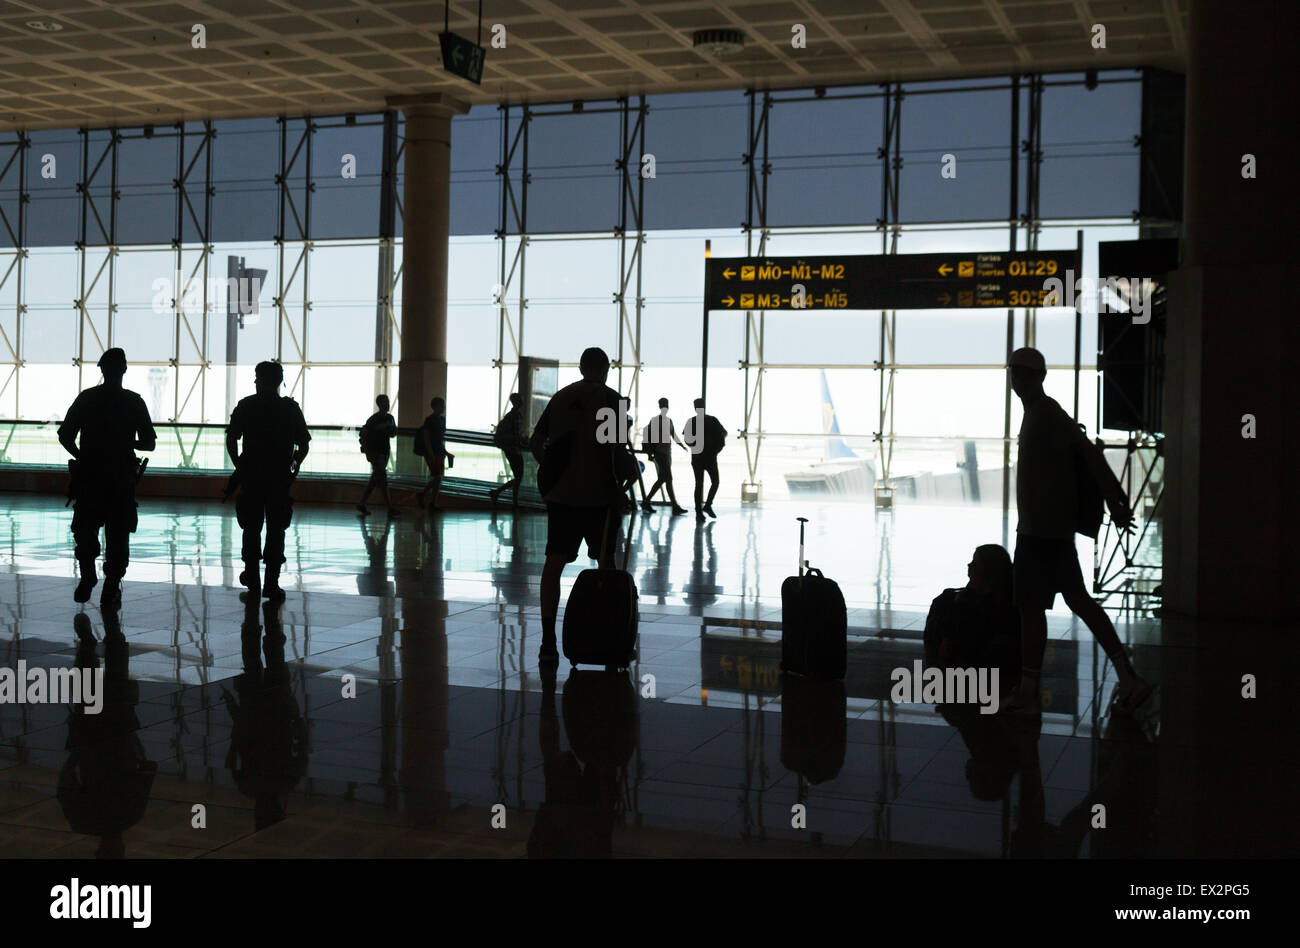 Silhouettes of people in the departure lounge, El Prat airport ( Barcelona airport ), Spain, Europe Stock Photo